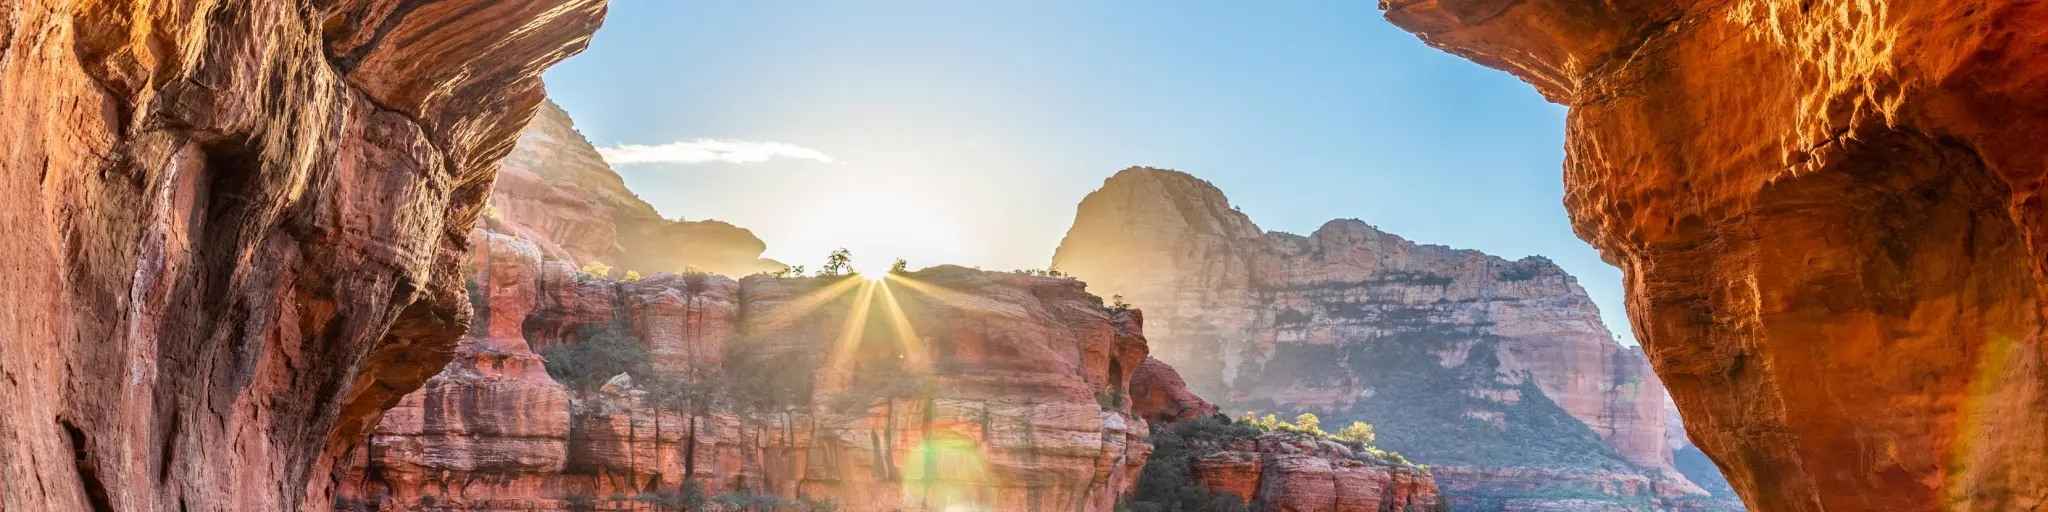 Sunrise view from a window created by two rock formations in Boynton Canyon on a sunny day